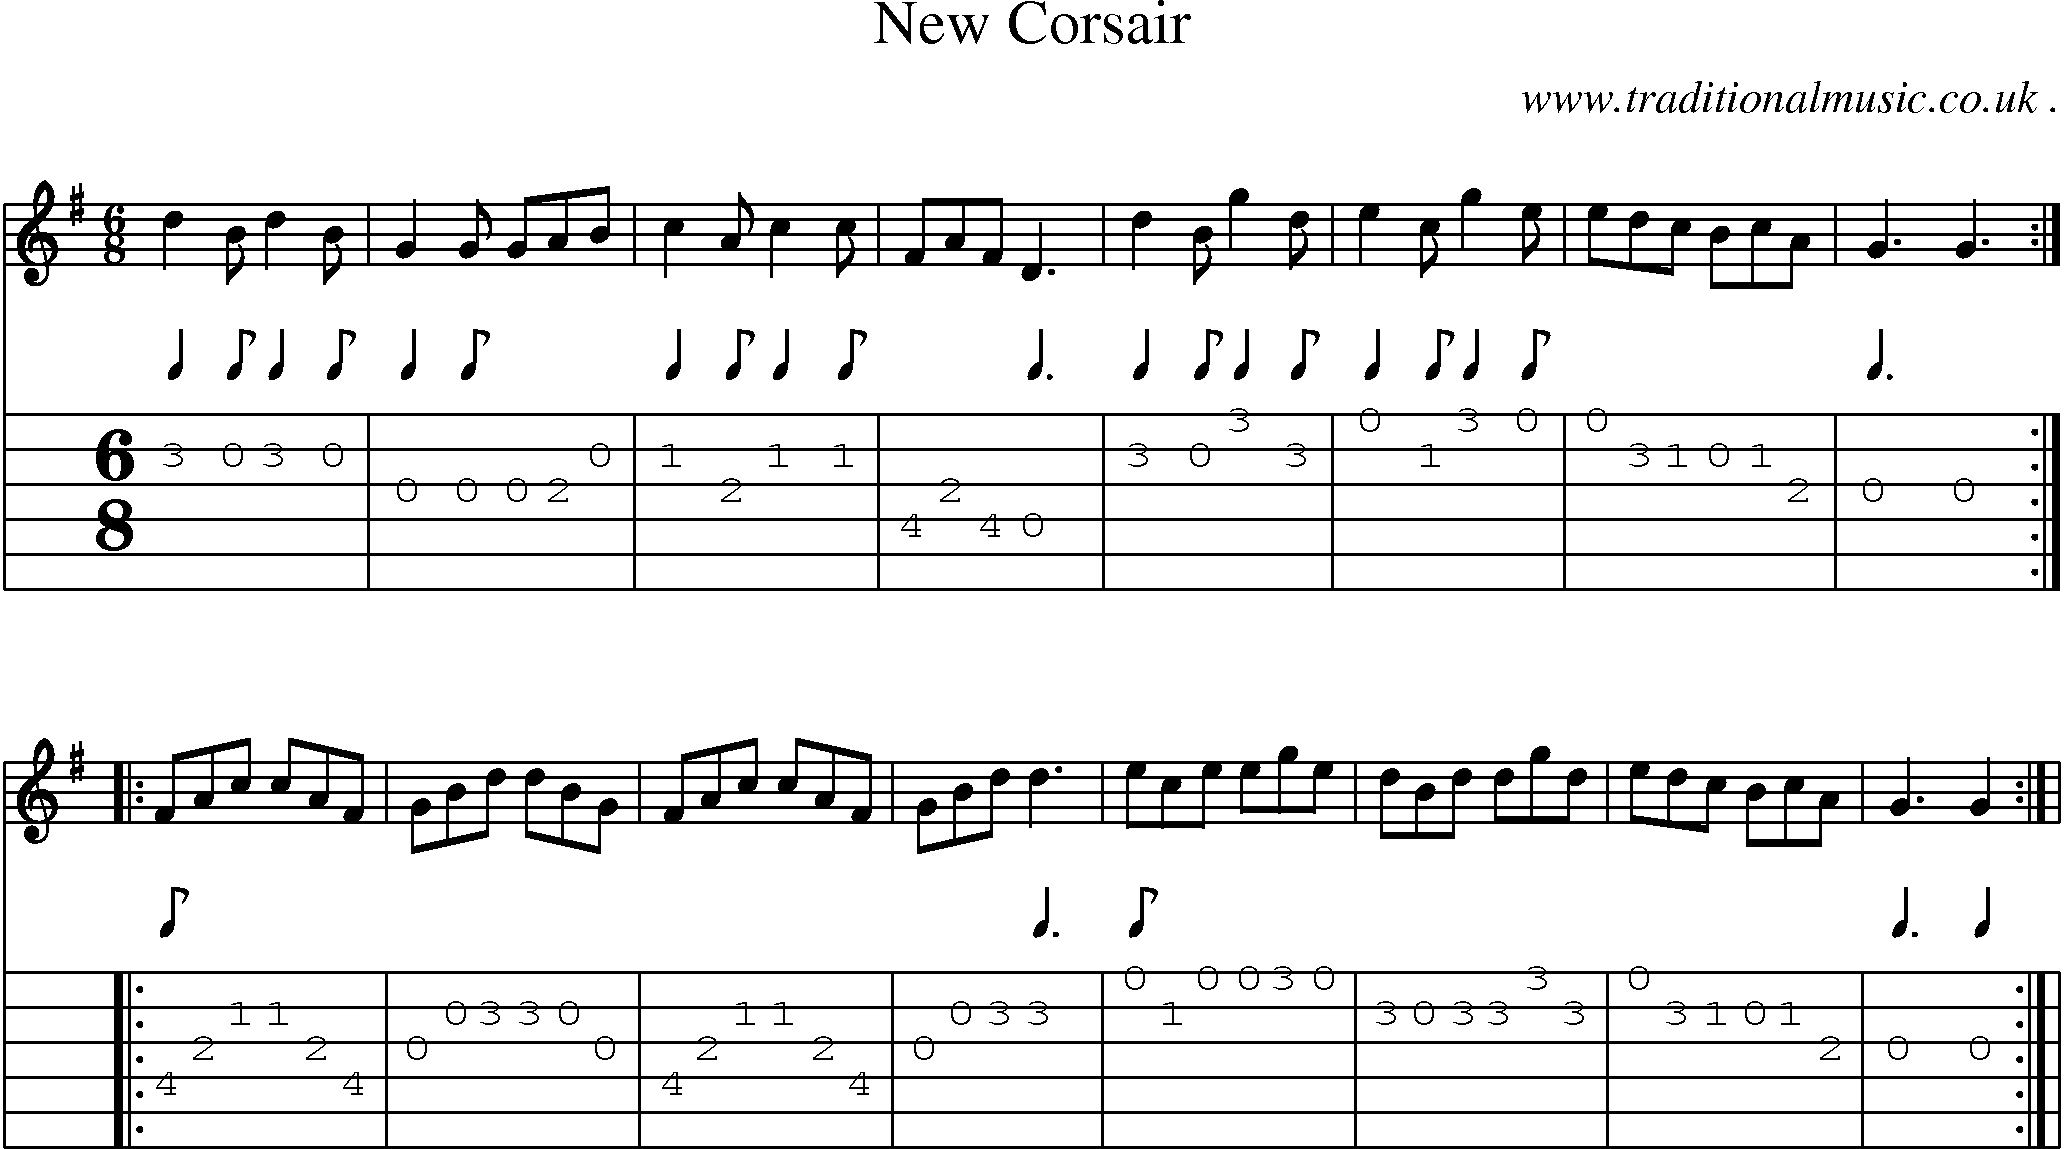 Sheet-Music and Guitar Tabs for New Corsair